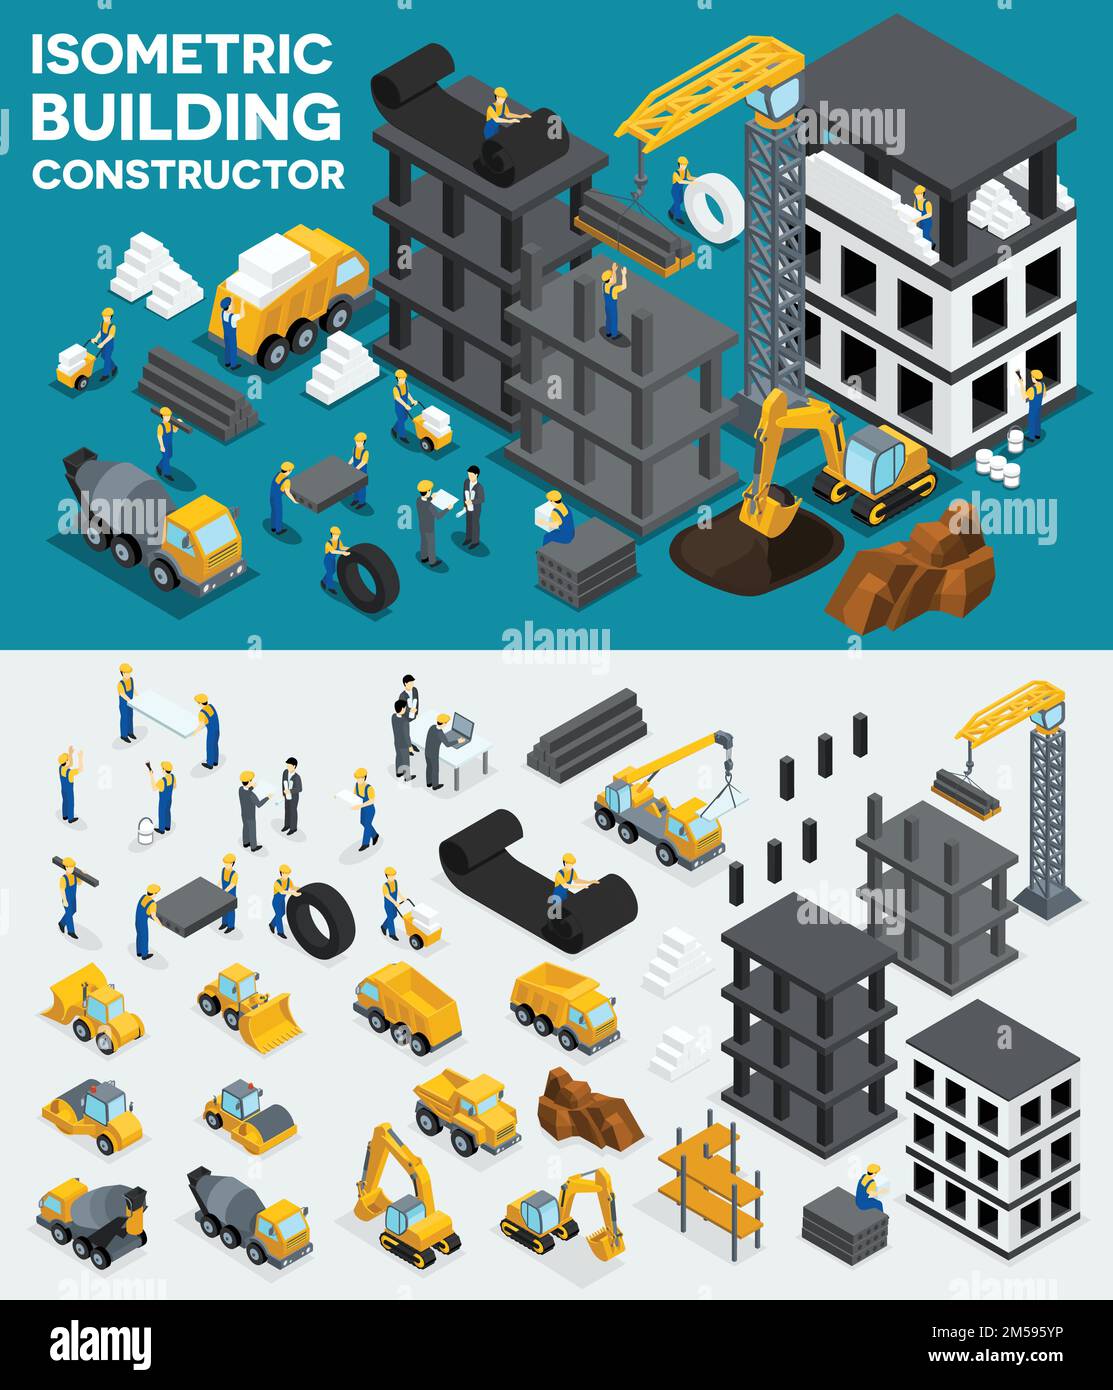 Design building isometric view, create your own design, building construction, excavation, heavy equipment, trucks, construction workers, people, unif Stock Vector